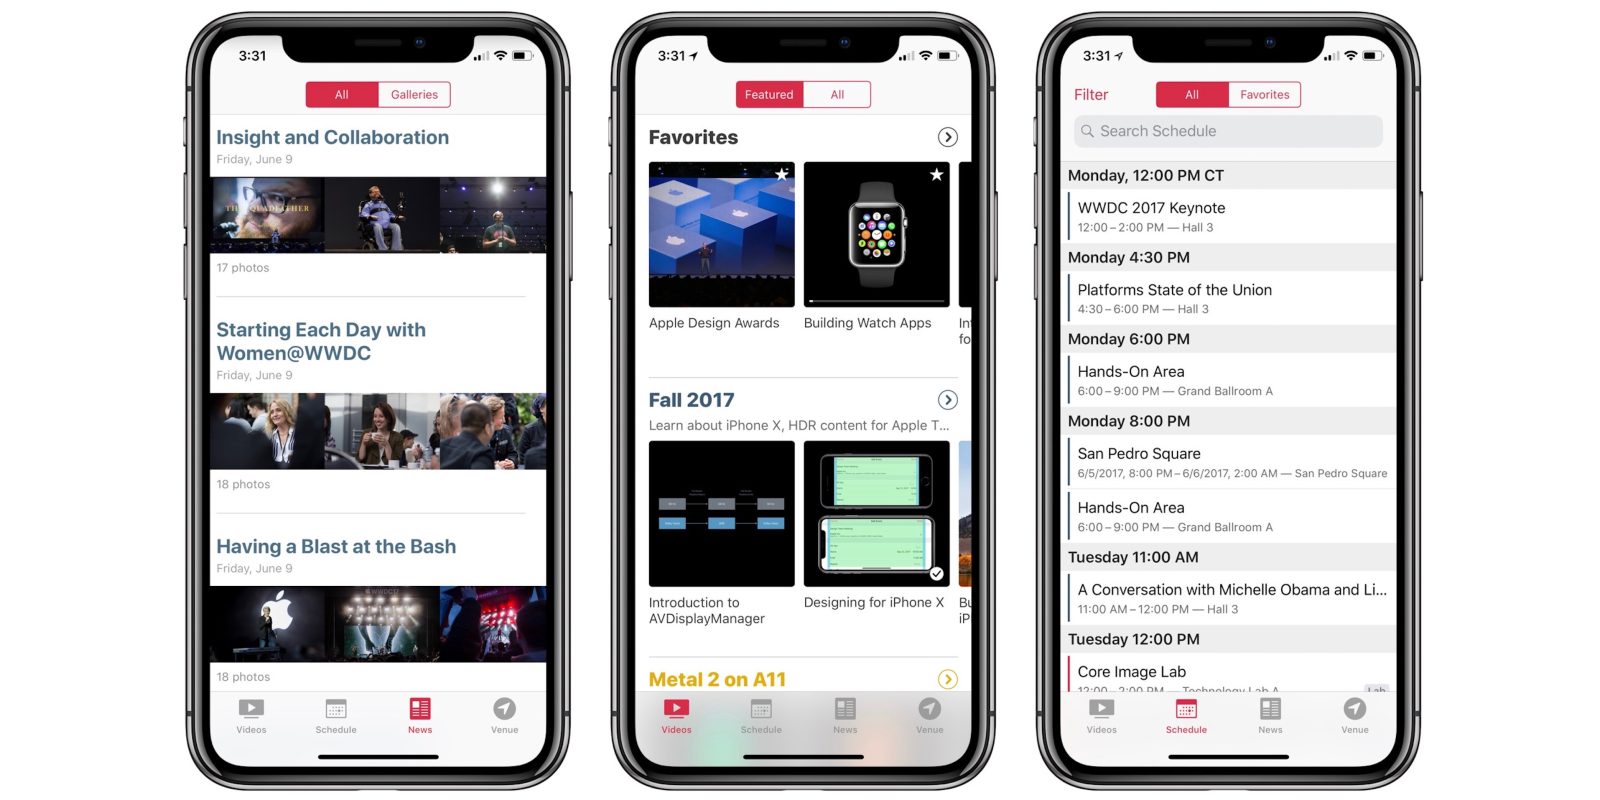 WWDC iOS App Updated for iOS 11 And iPhone X